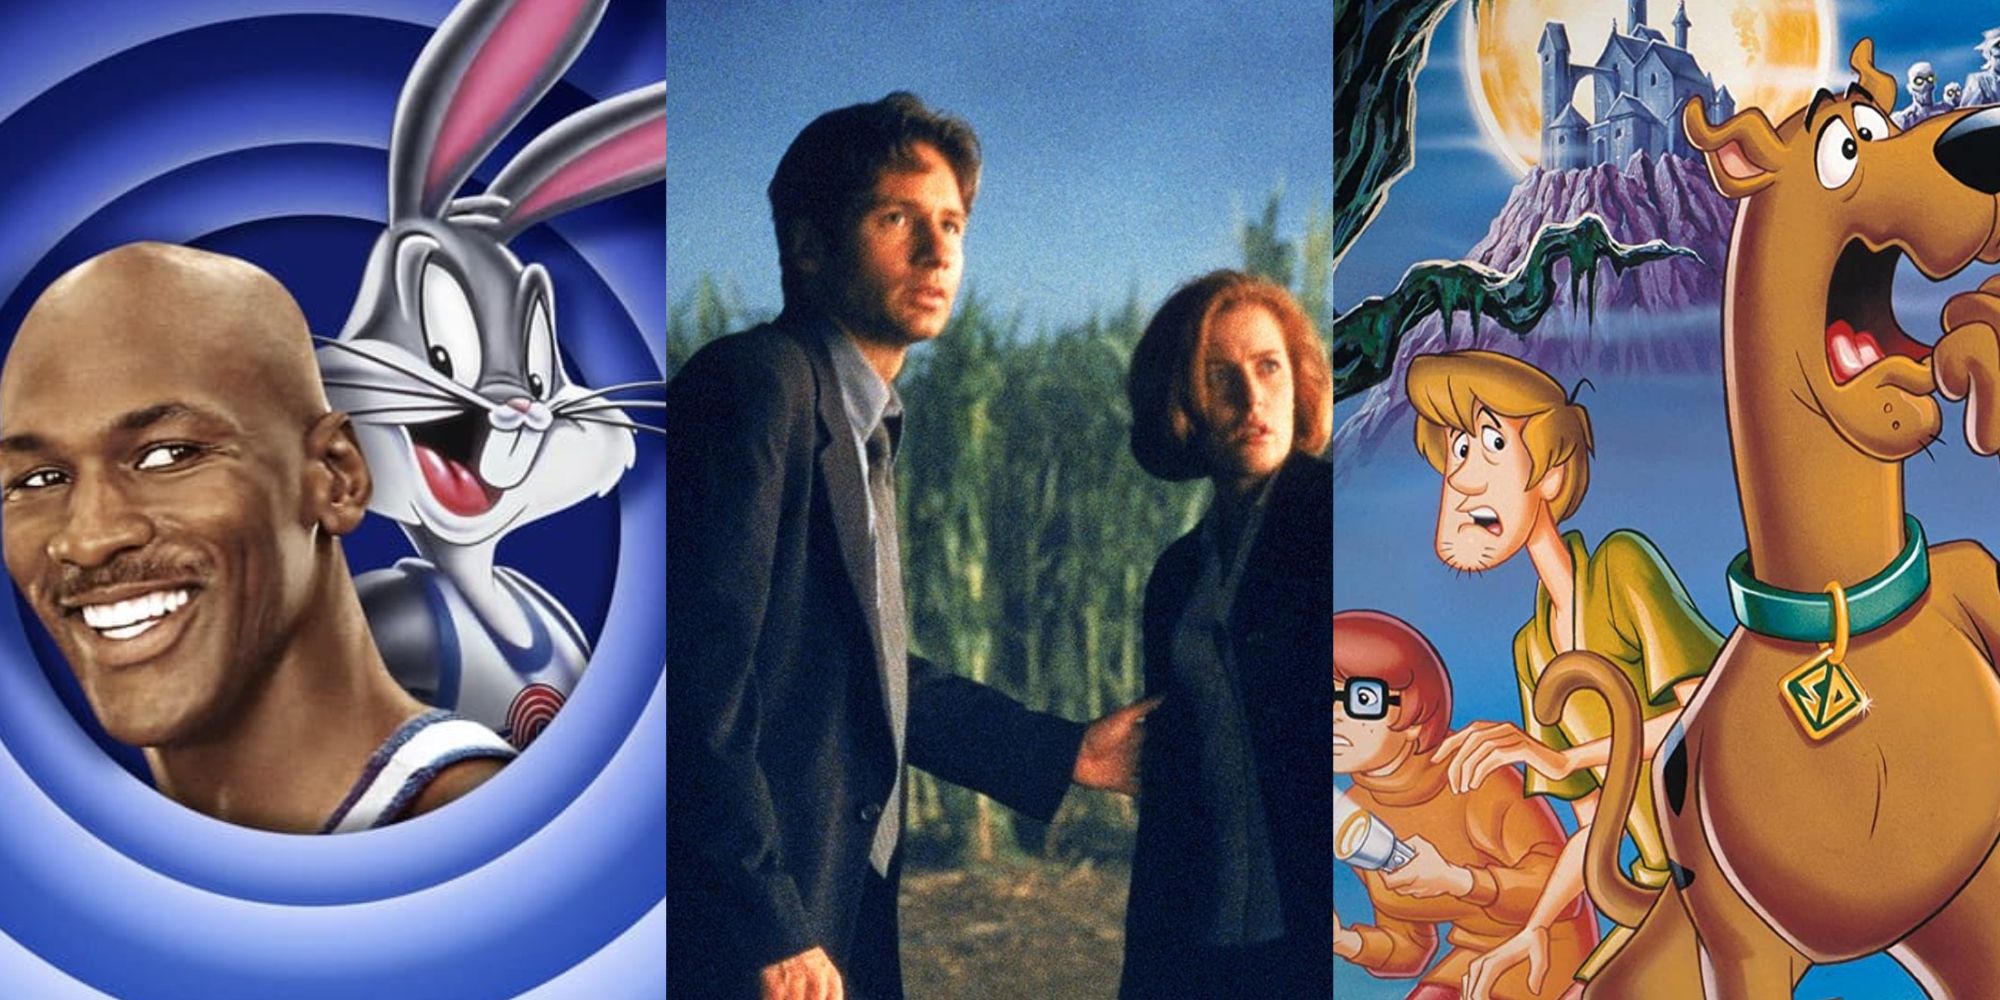 Split image Space Jam, Scully and Mulder, Scooby Doo